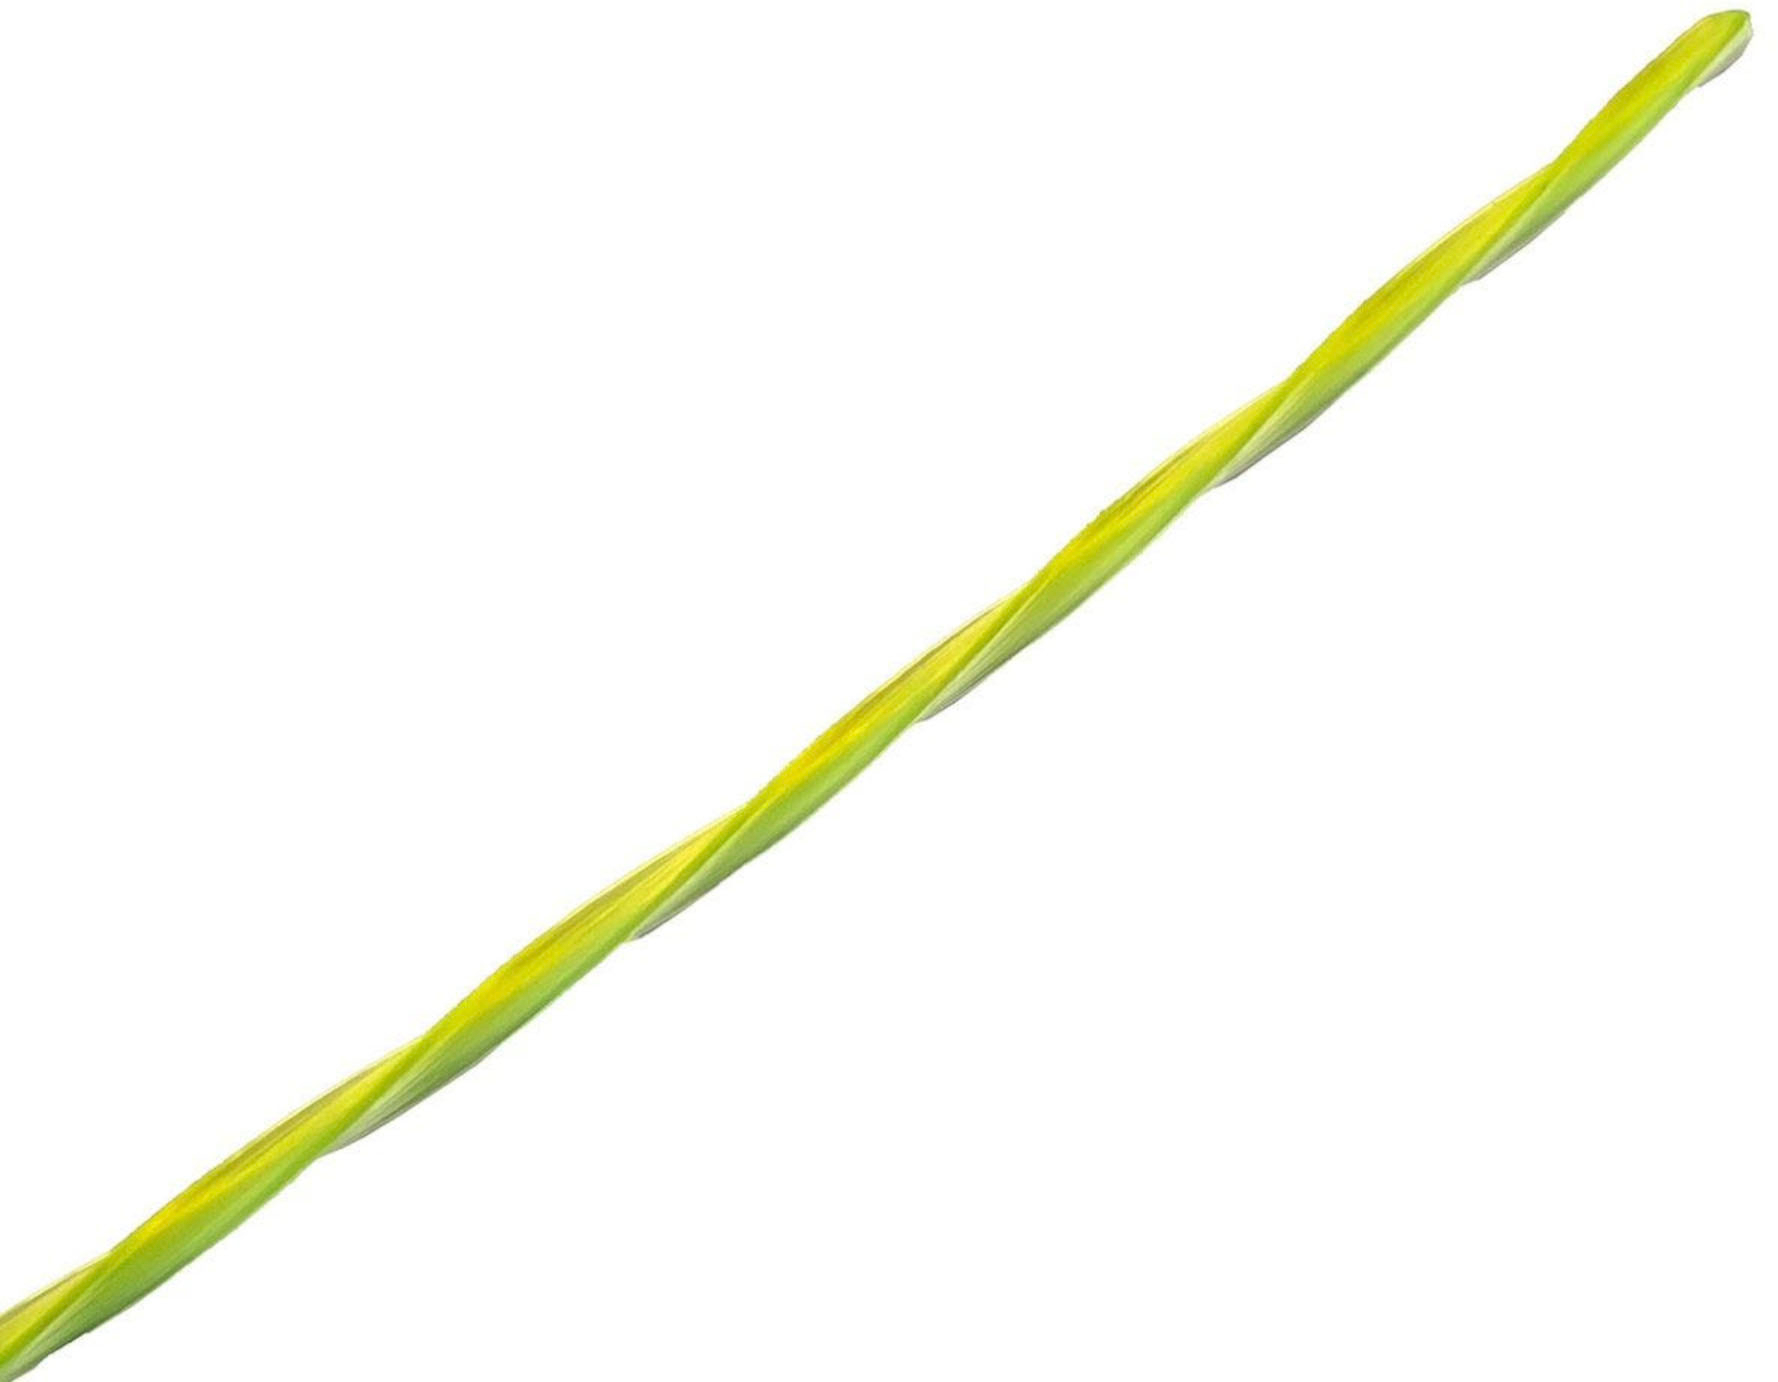 Left View: Greenworks - 0.095" Ultra Twisted String Trimmer Replacement Line (200 FT) - Green